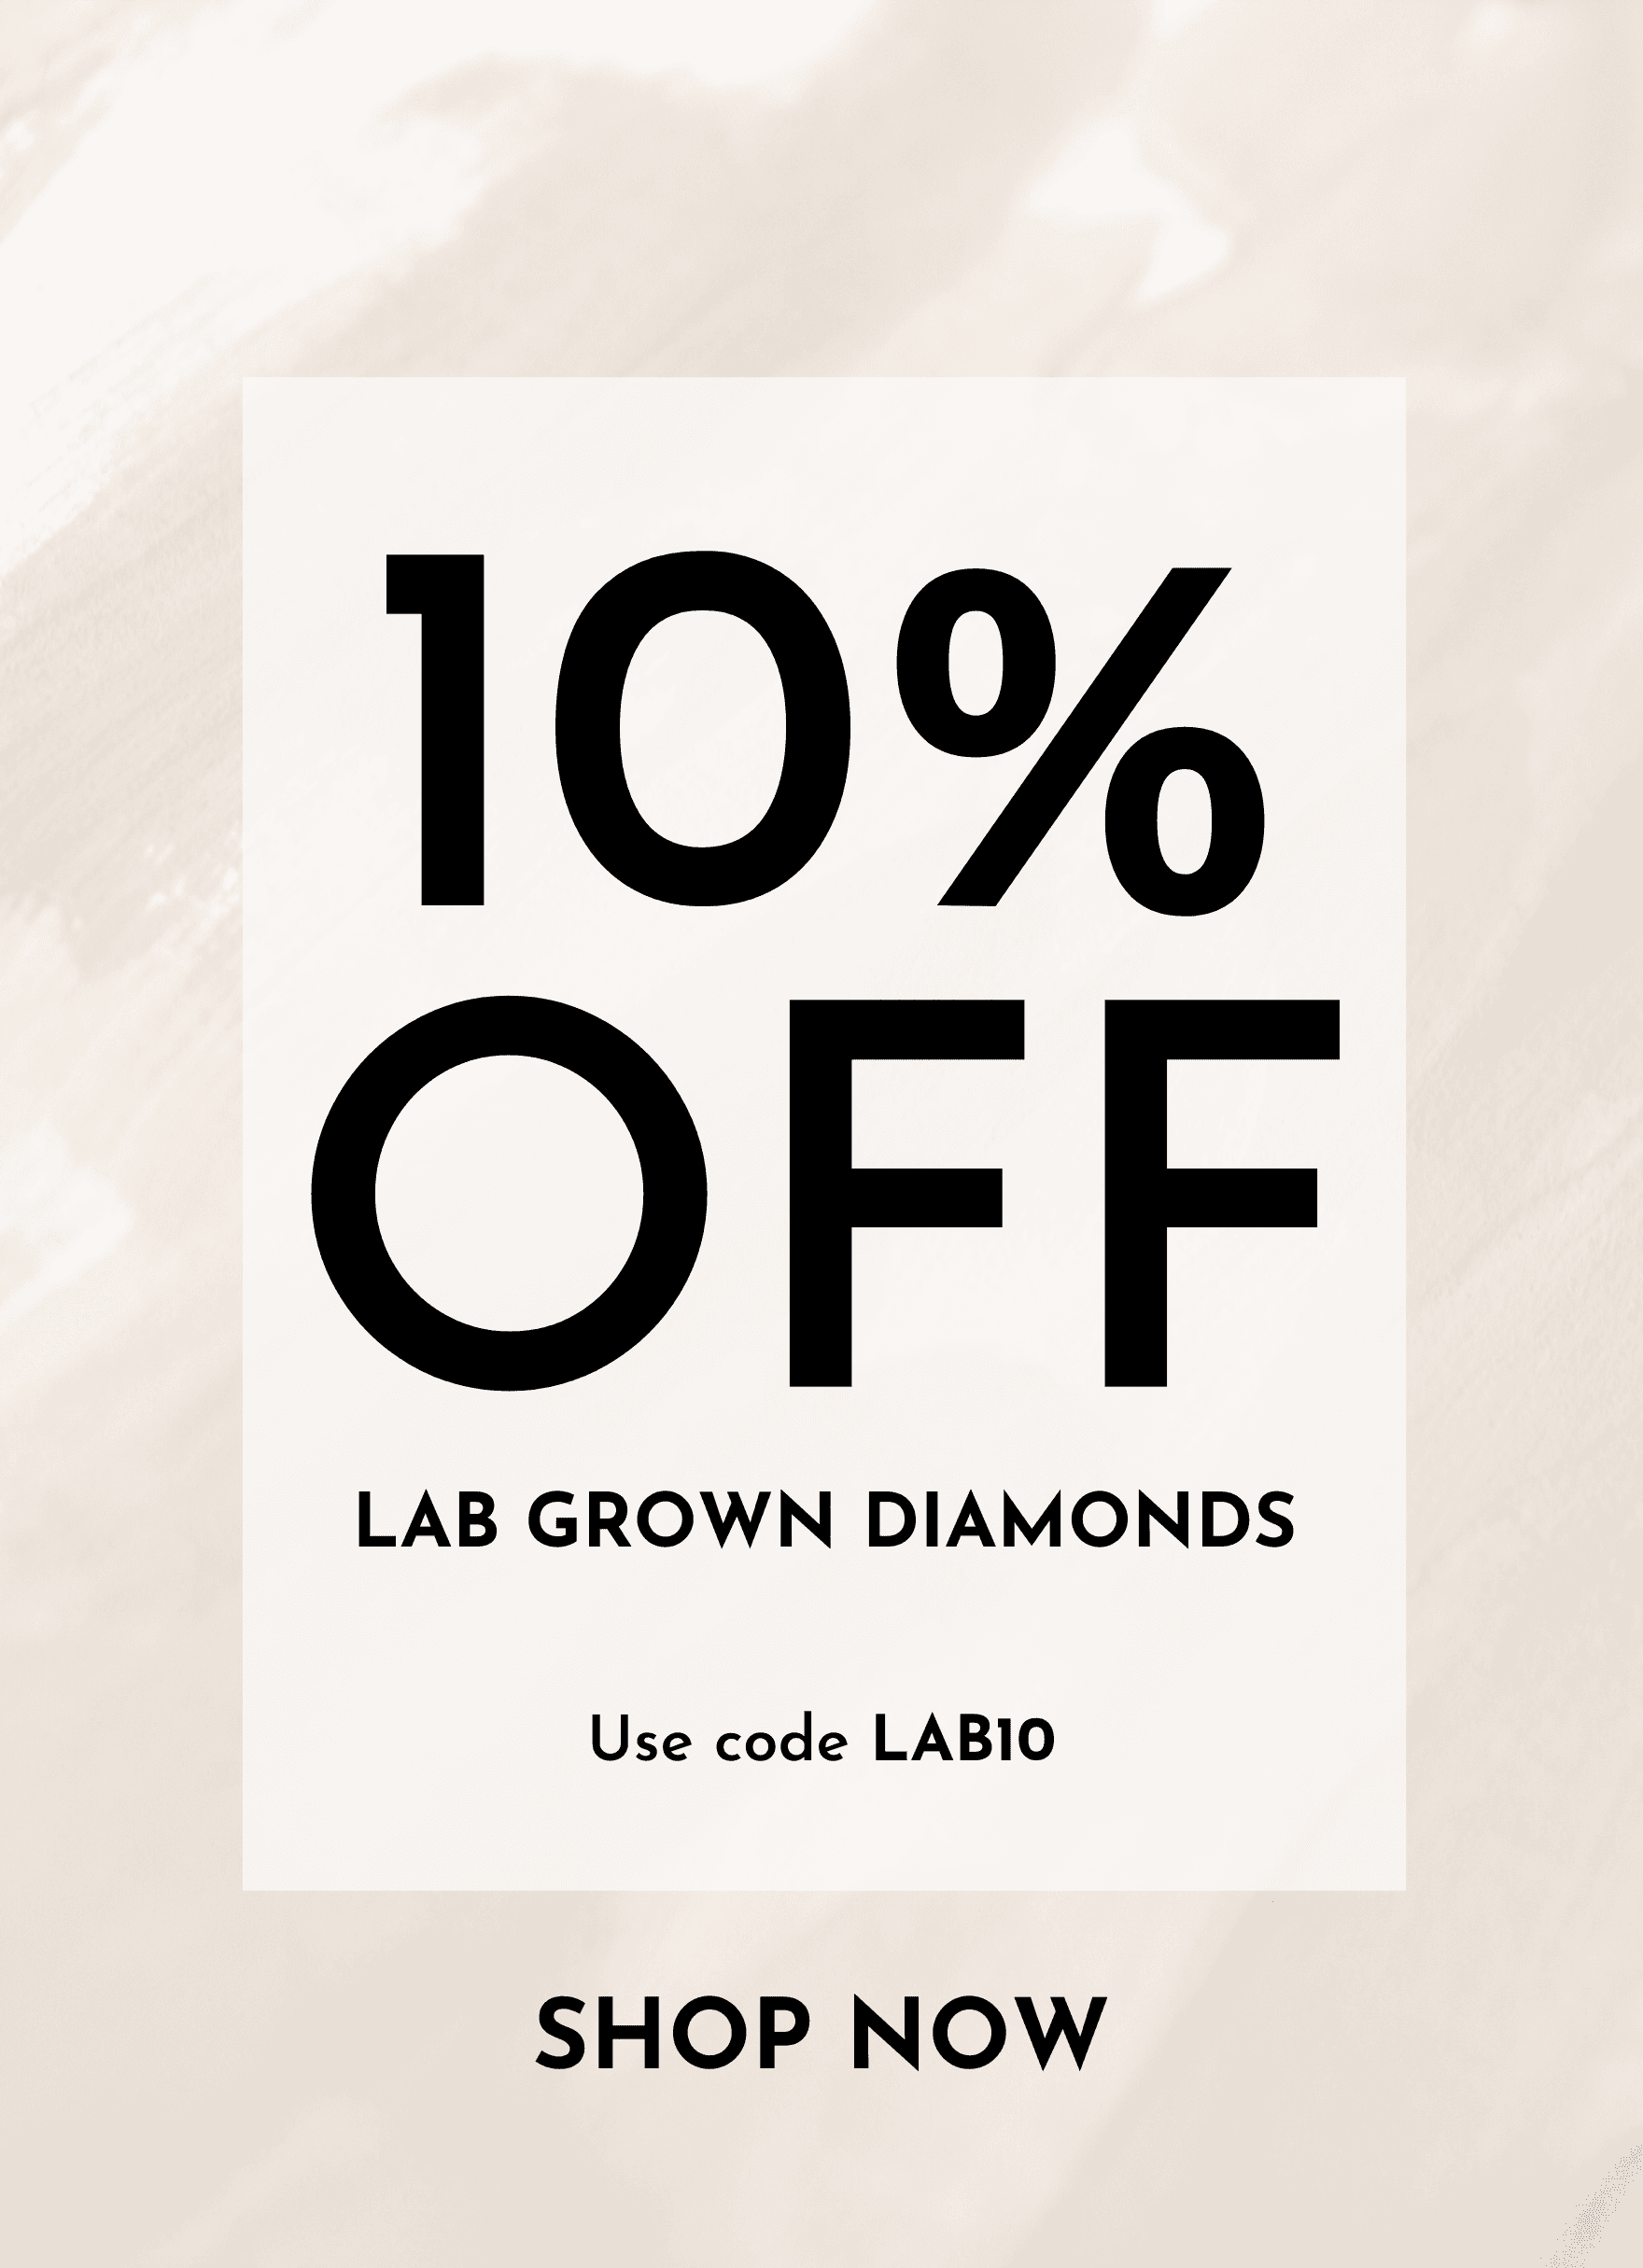 10% off lab grown diamonds with code LAB10